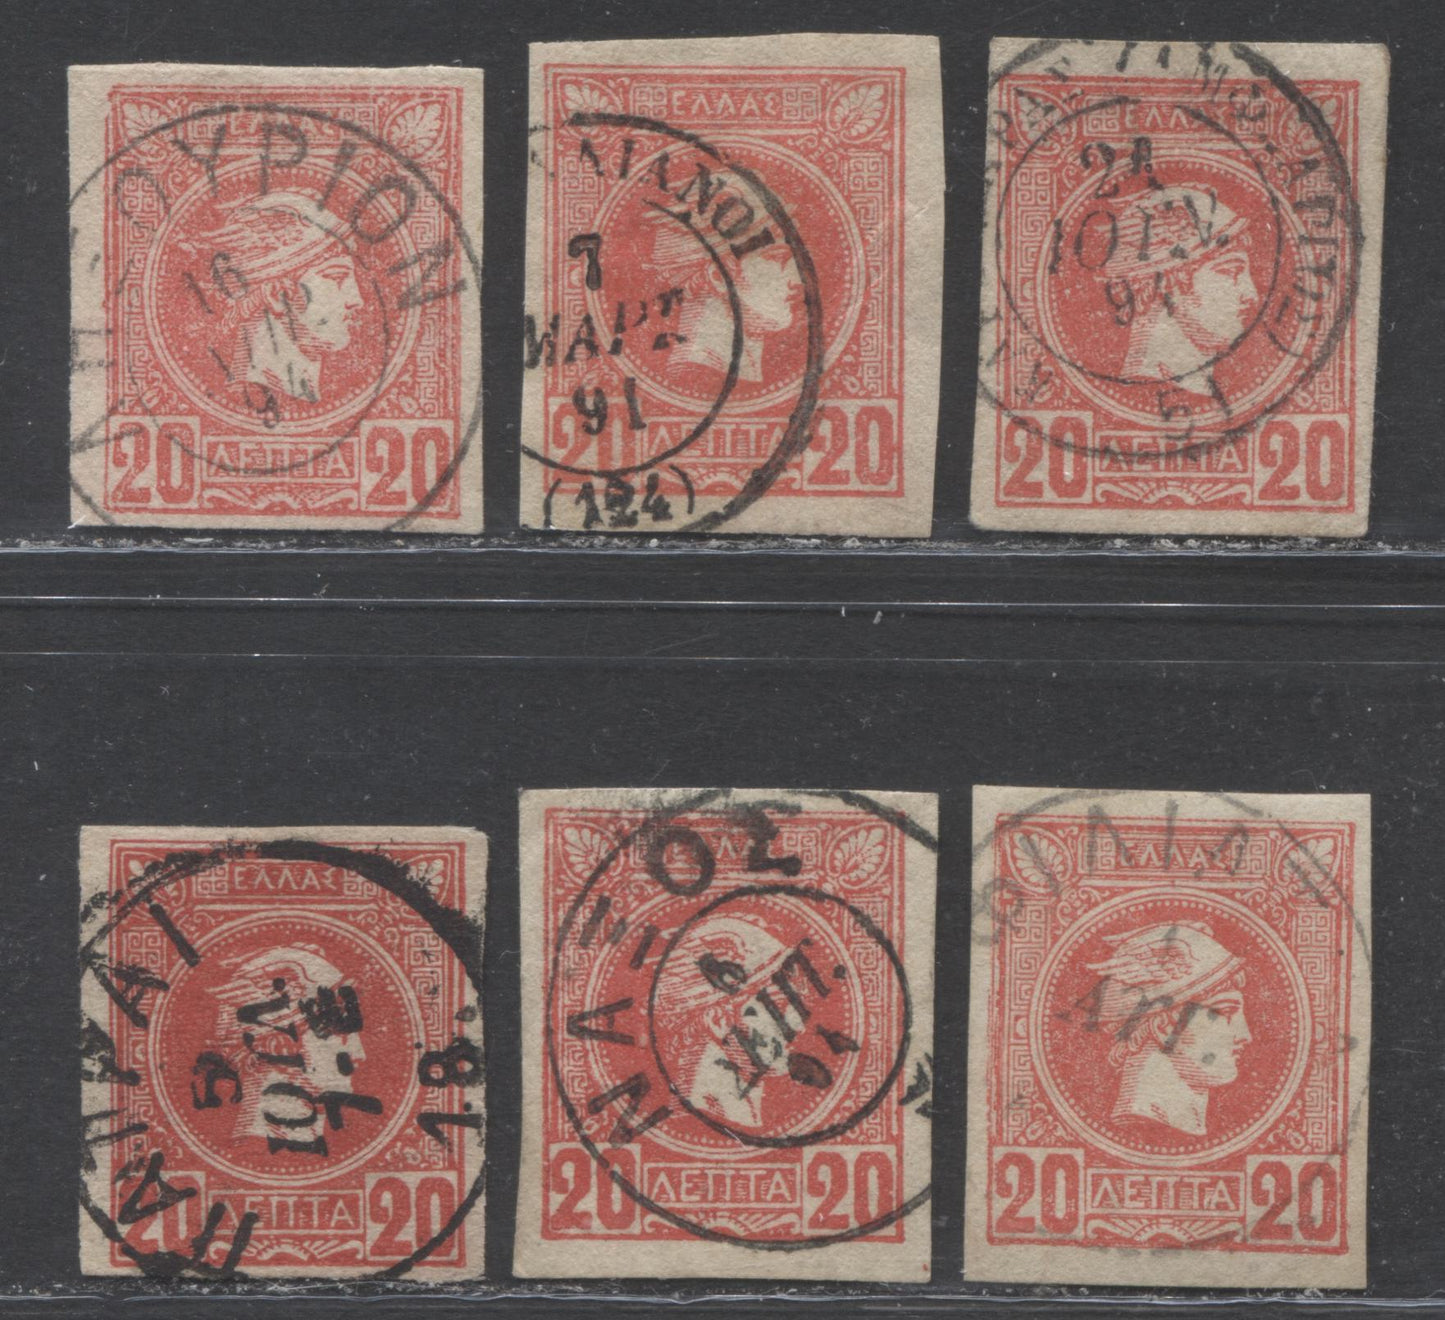 Lot 201 Greece SC#94 20l Rose Carmine 1889-1895 Small Hermes Head Issue Printed in Athens, Six VF Used Examples, All With SON Cancels, 2022 Scott Calssic Cat. $49.50 USD, Click on Listing to See ALL Pictures